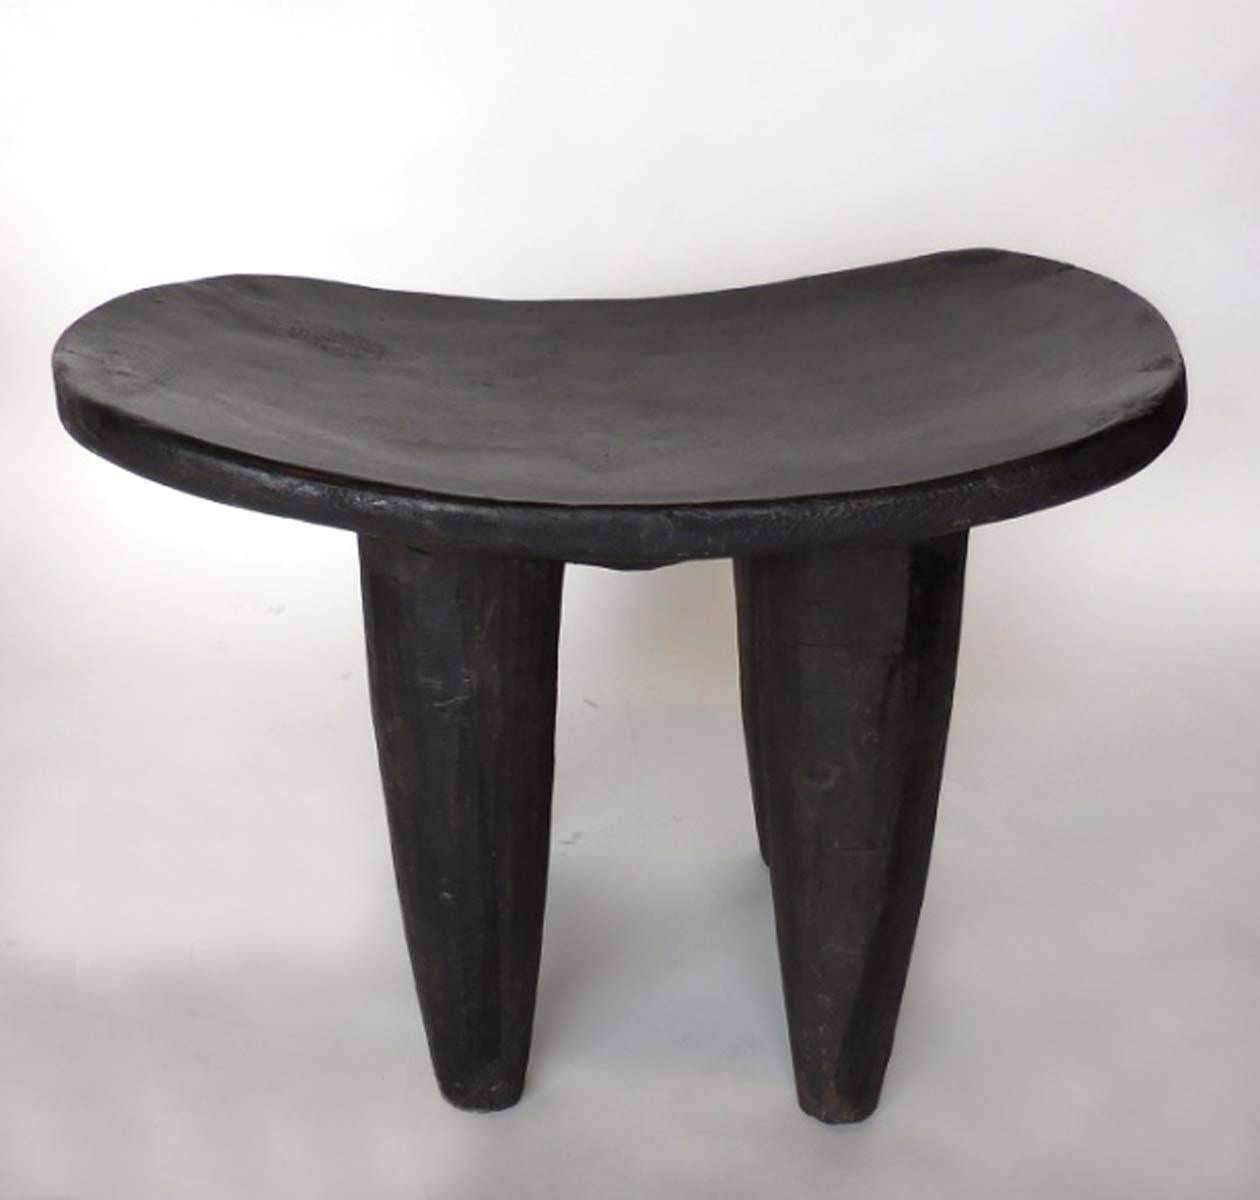 Tribal Vintage Senufo Tribe Stool from Mali - RIGHT ONE AVAILABLE